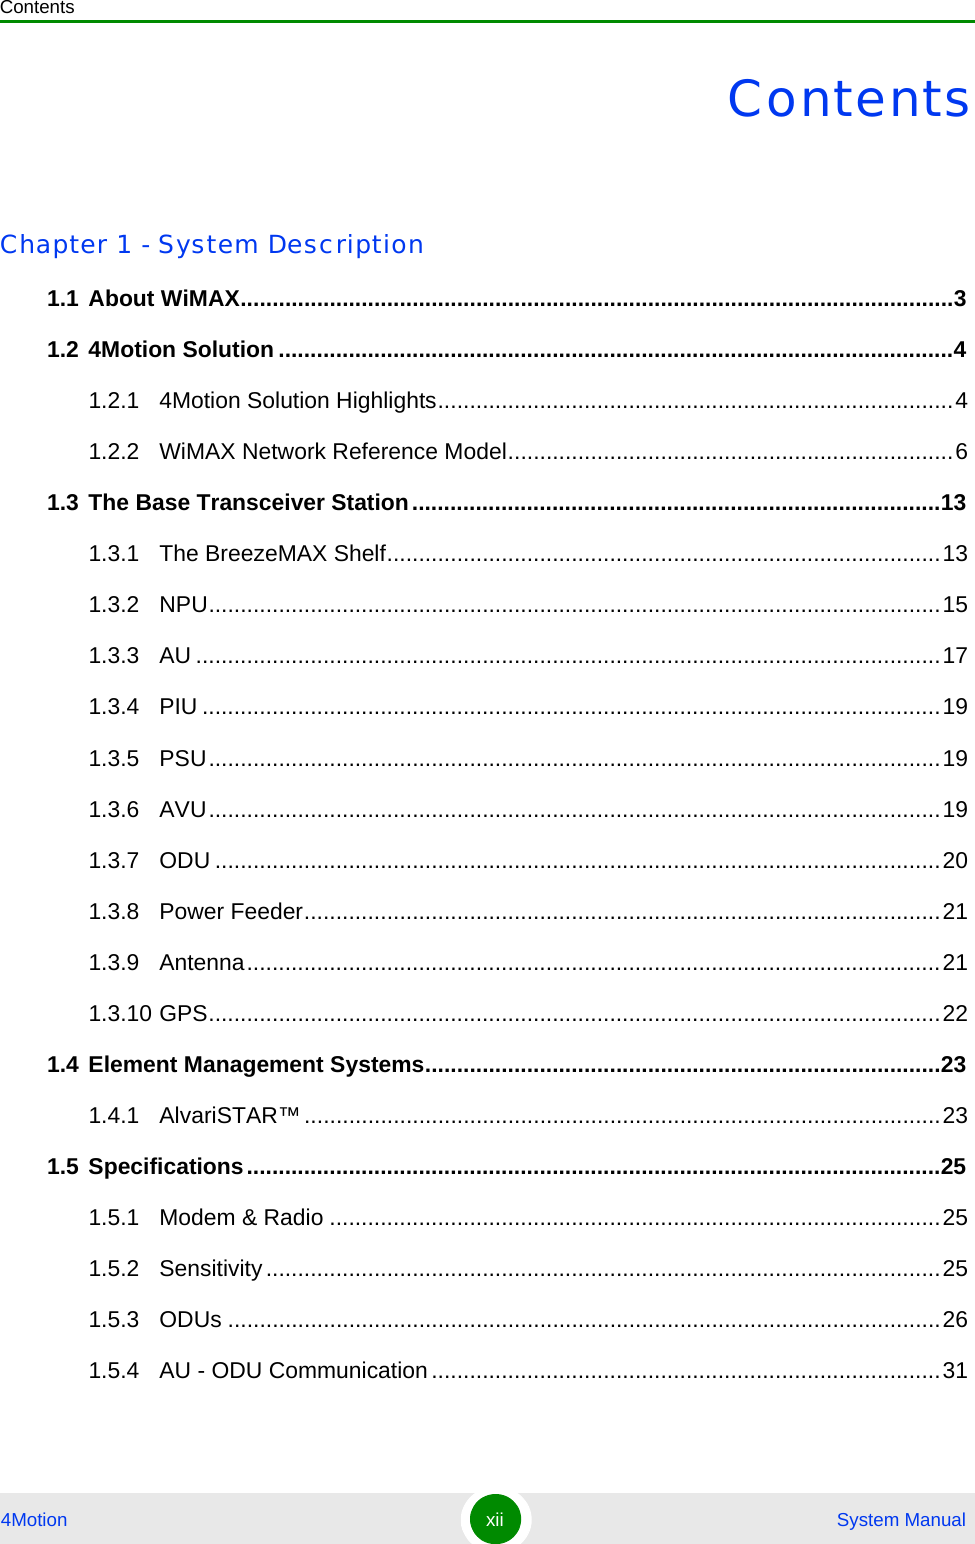 Contents4Motion xii  System ManualContentsChapter 1 - System Description1.1 About WiMAX................................................................................................................31.2 4Motion Solution ..........................................................................................................41.2.1 4Motion Solution Highlights.................................................................................41.2.2 WiMAX Network Reference Model......................................................................61.3 The Base Transceiver Station...................................................................................131.3.1 The BreezeMAX Shelf.......................................................................................131.3.2 NPU...................................................................................................................151.3.3 AU .....................................................................................................................171.3.4 PIU ....................................................................................................................191.3.5 PSU...................................................................................................................191.3.6 AVU...................................................................................................................191.3.7 ODU ..................................................................................................................201.3.8 Power Feeder....................................................................................................211.3.9 Antenna.............................................................................................................211.3.10 GPS...................................................................................................................221.4 Element Management Systems.................................................................................231.4.1 AlvariSTAR™....................................................................................................231.5 Specifications.............................................................................................................251.5.1 Modem &amp; Radio ................................................................................................251.5.2 Sensitivity..........................................................................................................251.5.3 ODUs ................................................................................................................261.5.4 AU - ODU Communication................................................................................31